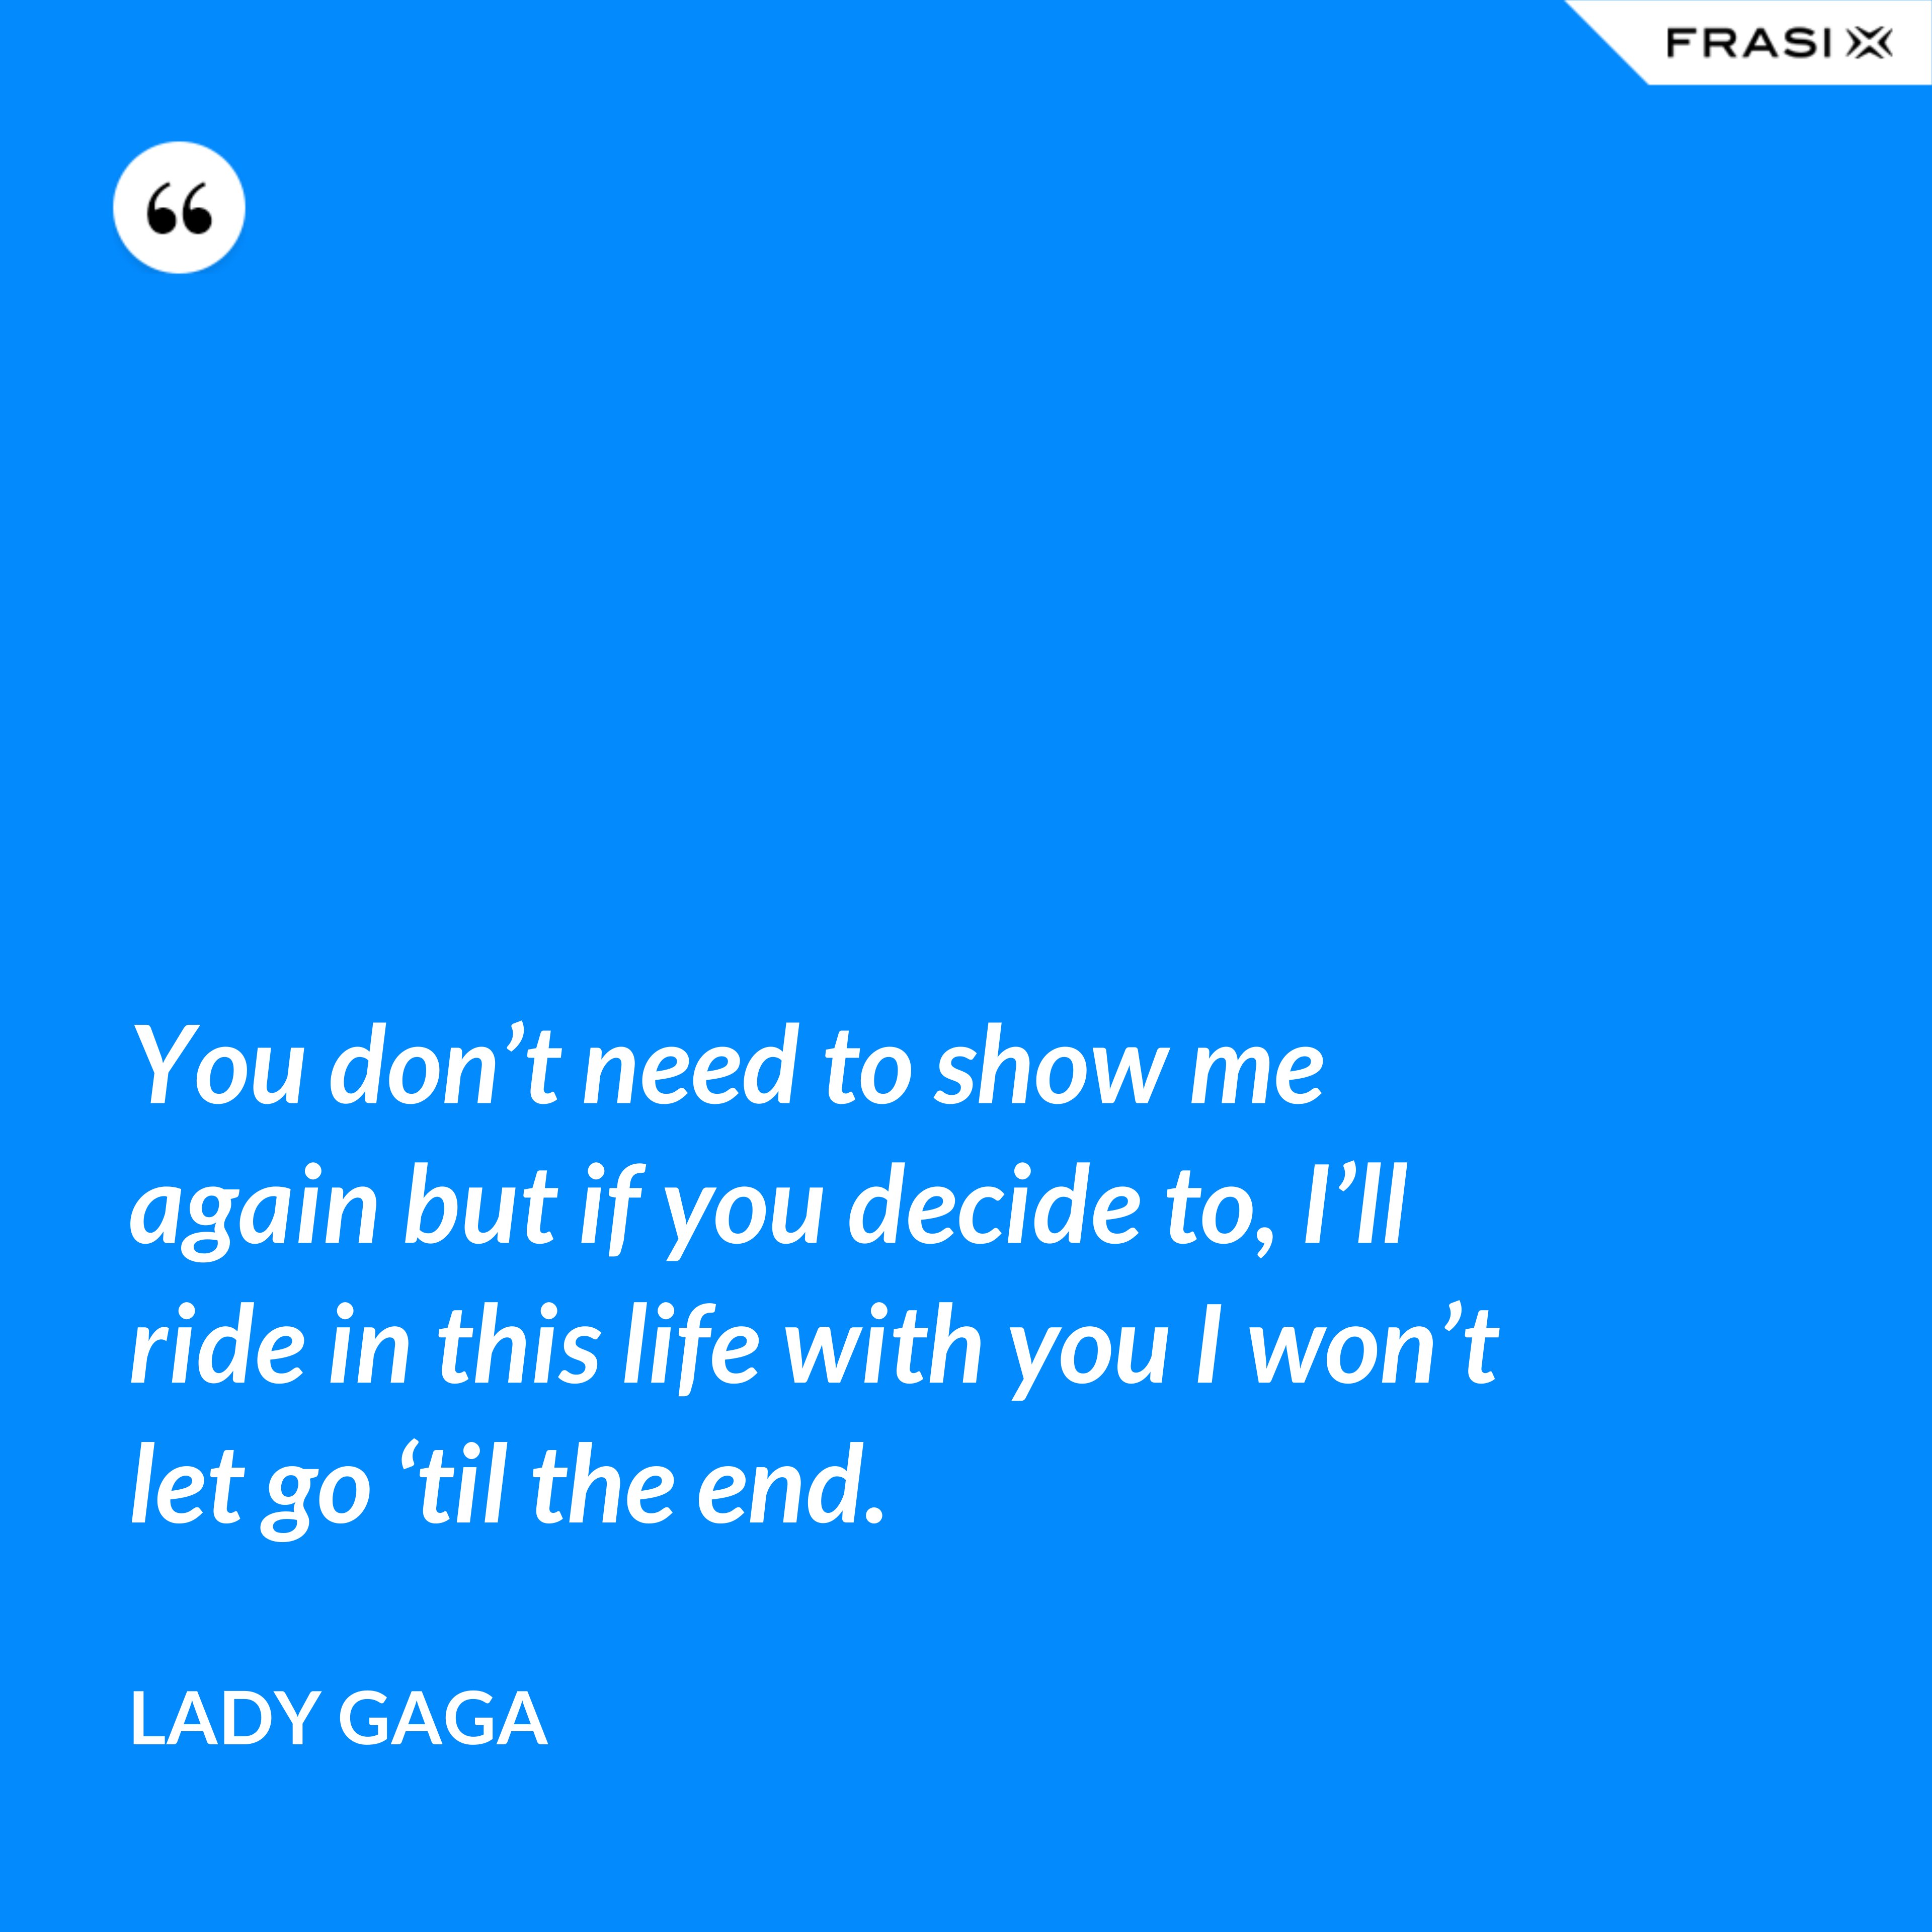 You don’t need to show me again but if you decide to, I’ll ride in this life with you I won’t let go ‘til the end. - Lady Gaga